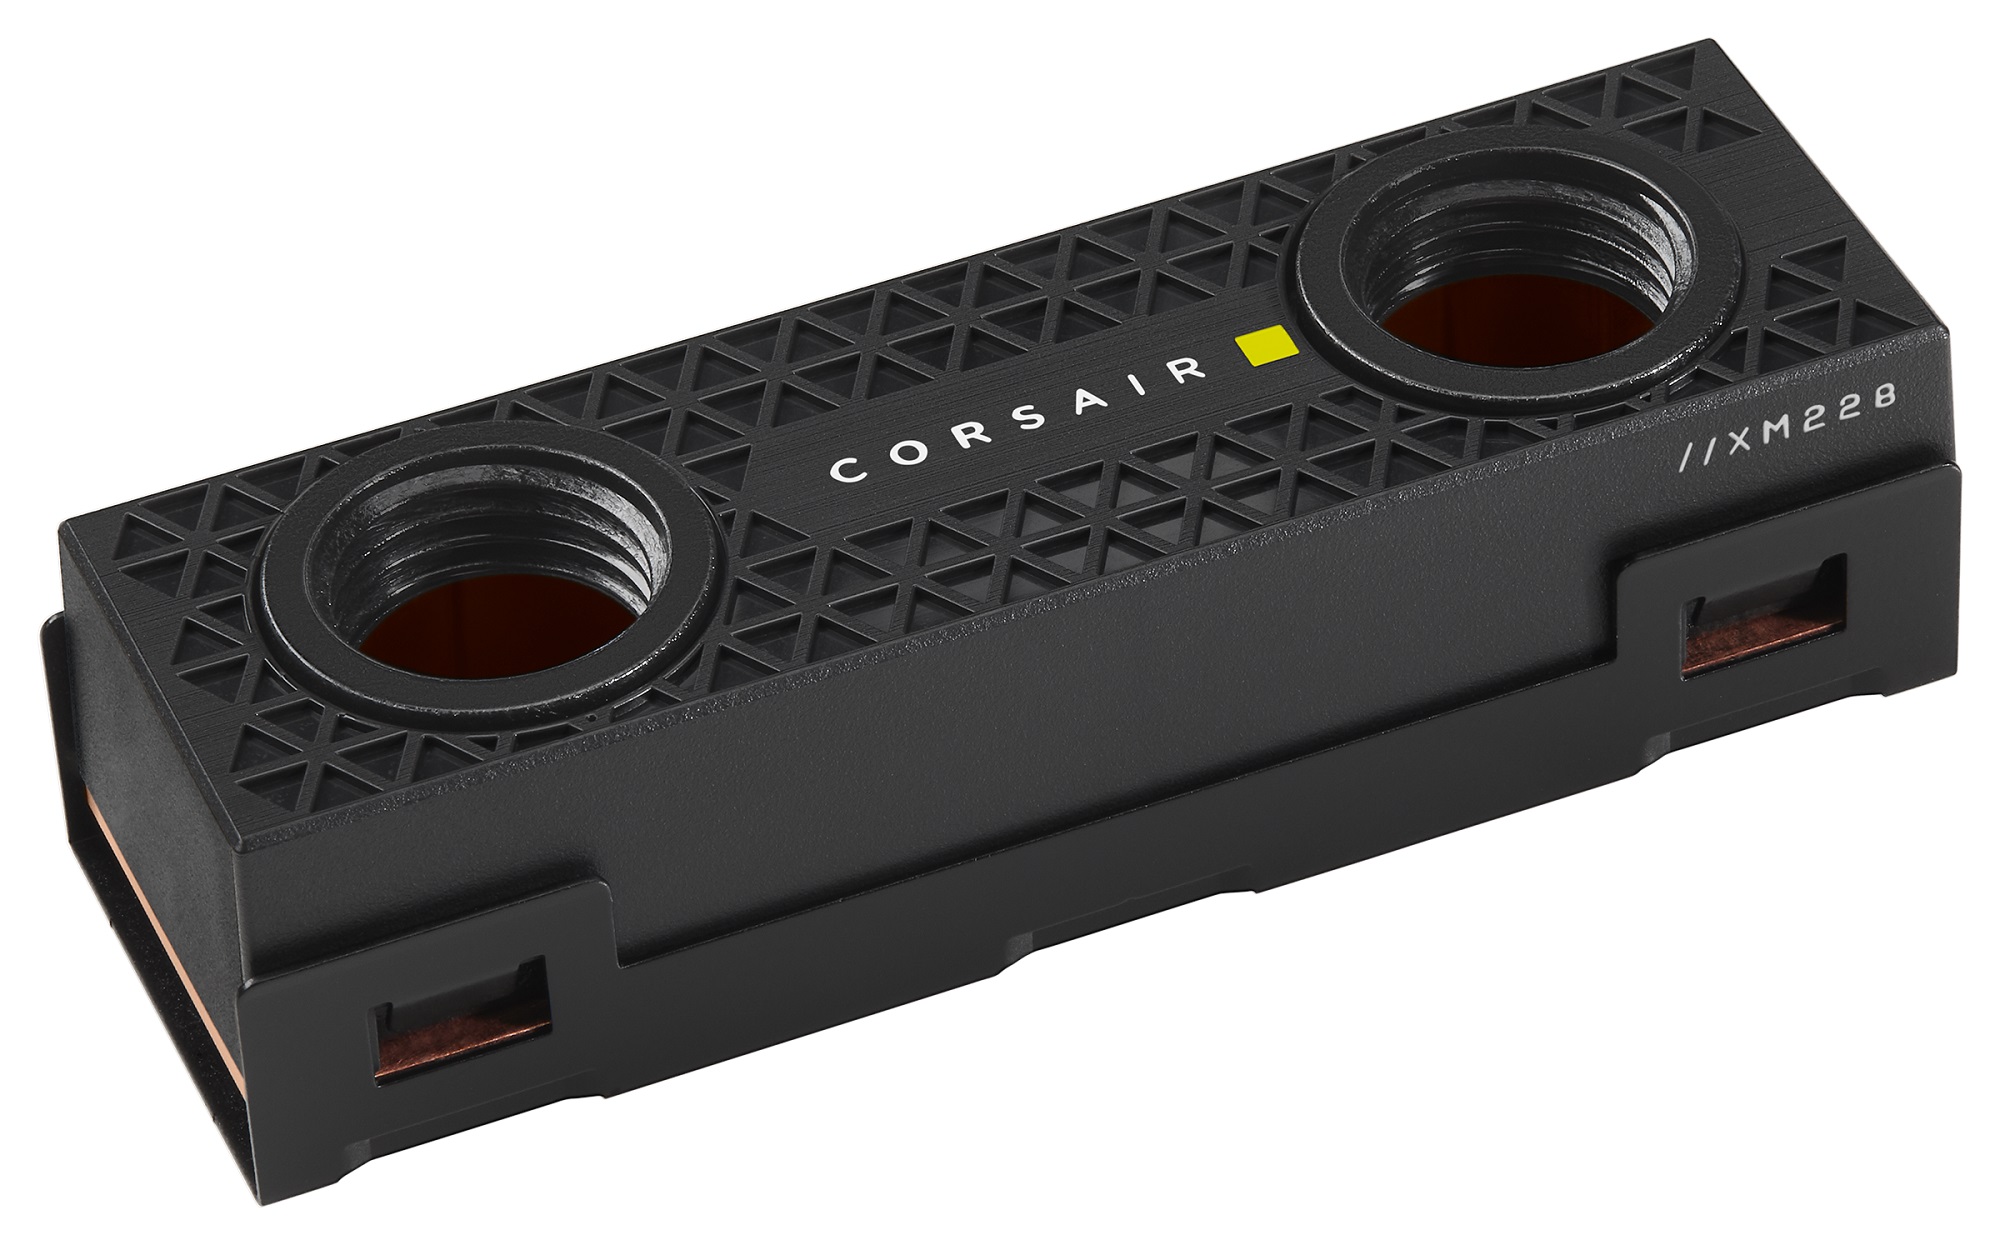 Corsair MP600 Pro XT - Best PCIe 4.0 SSD w/ water-cooling option